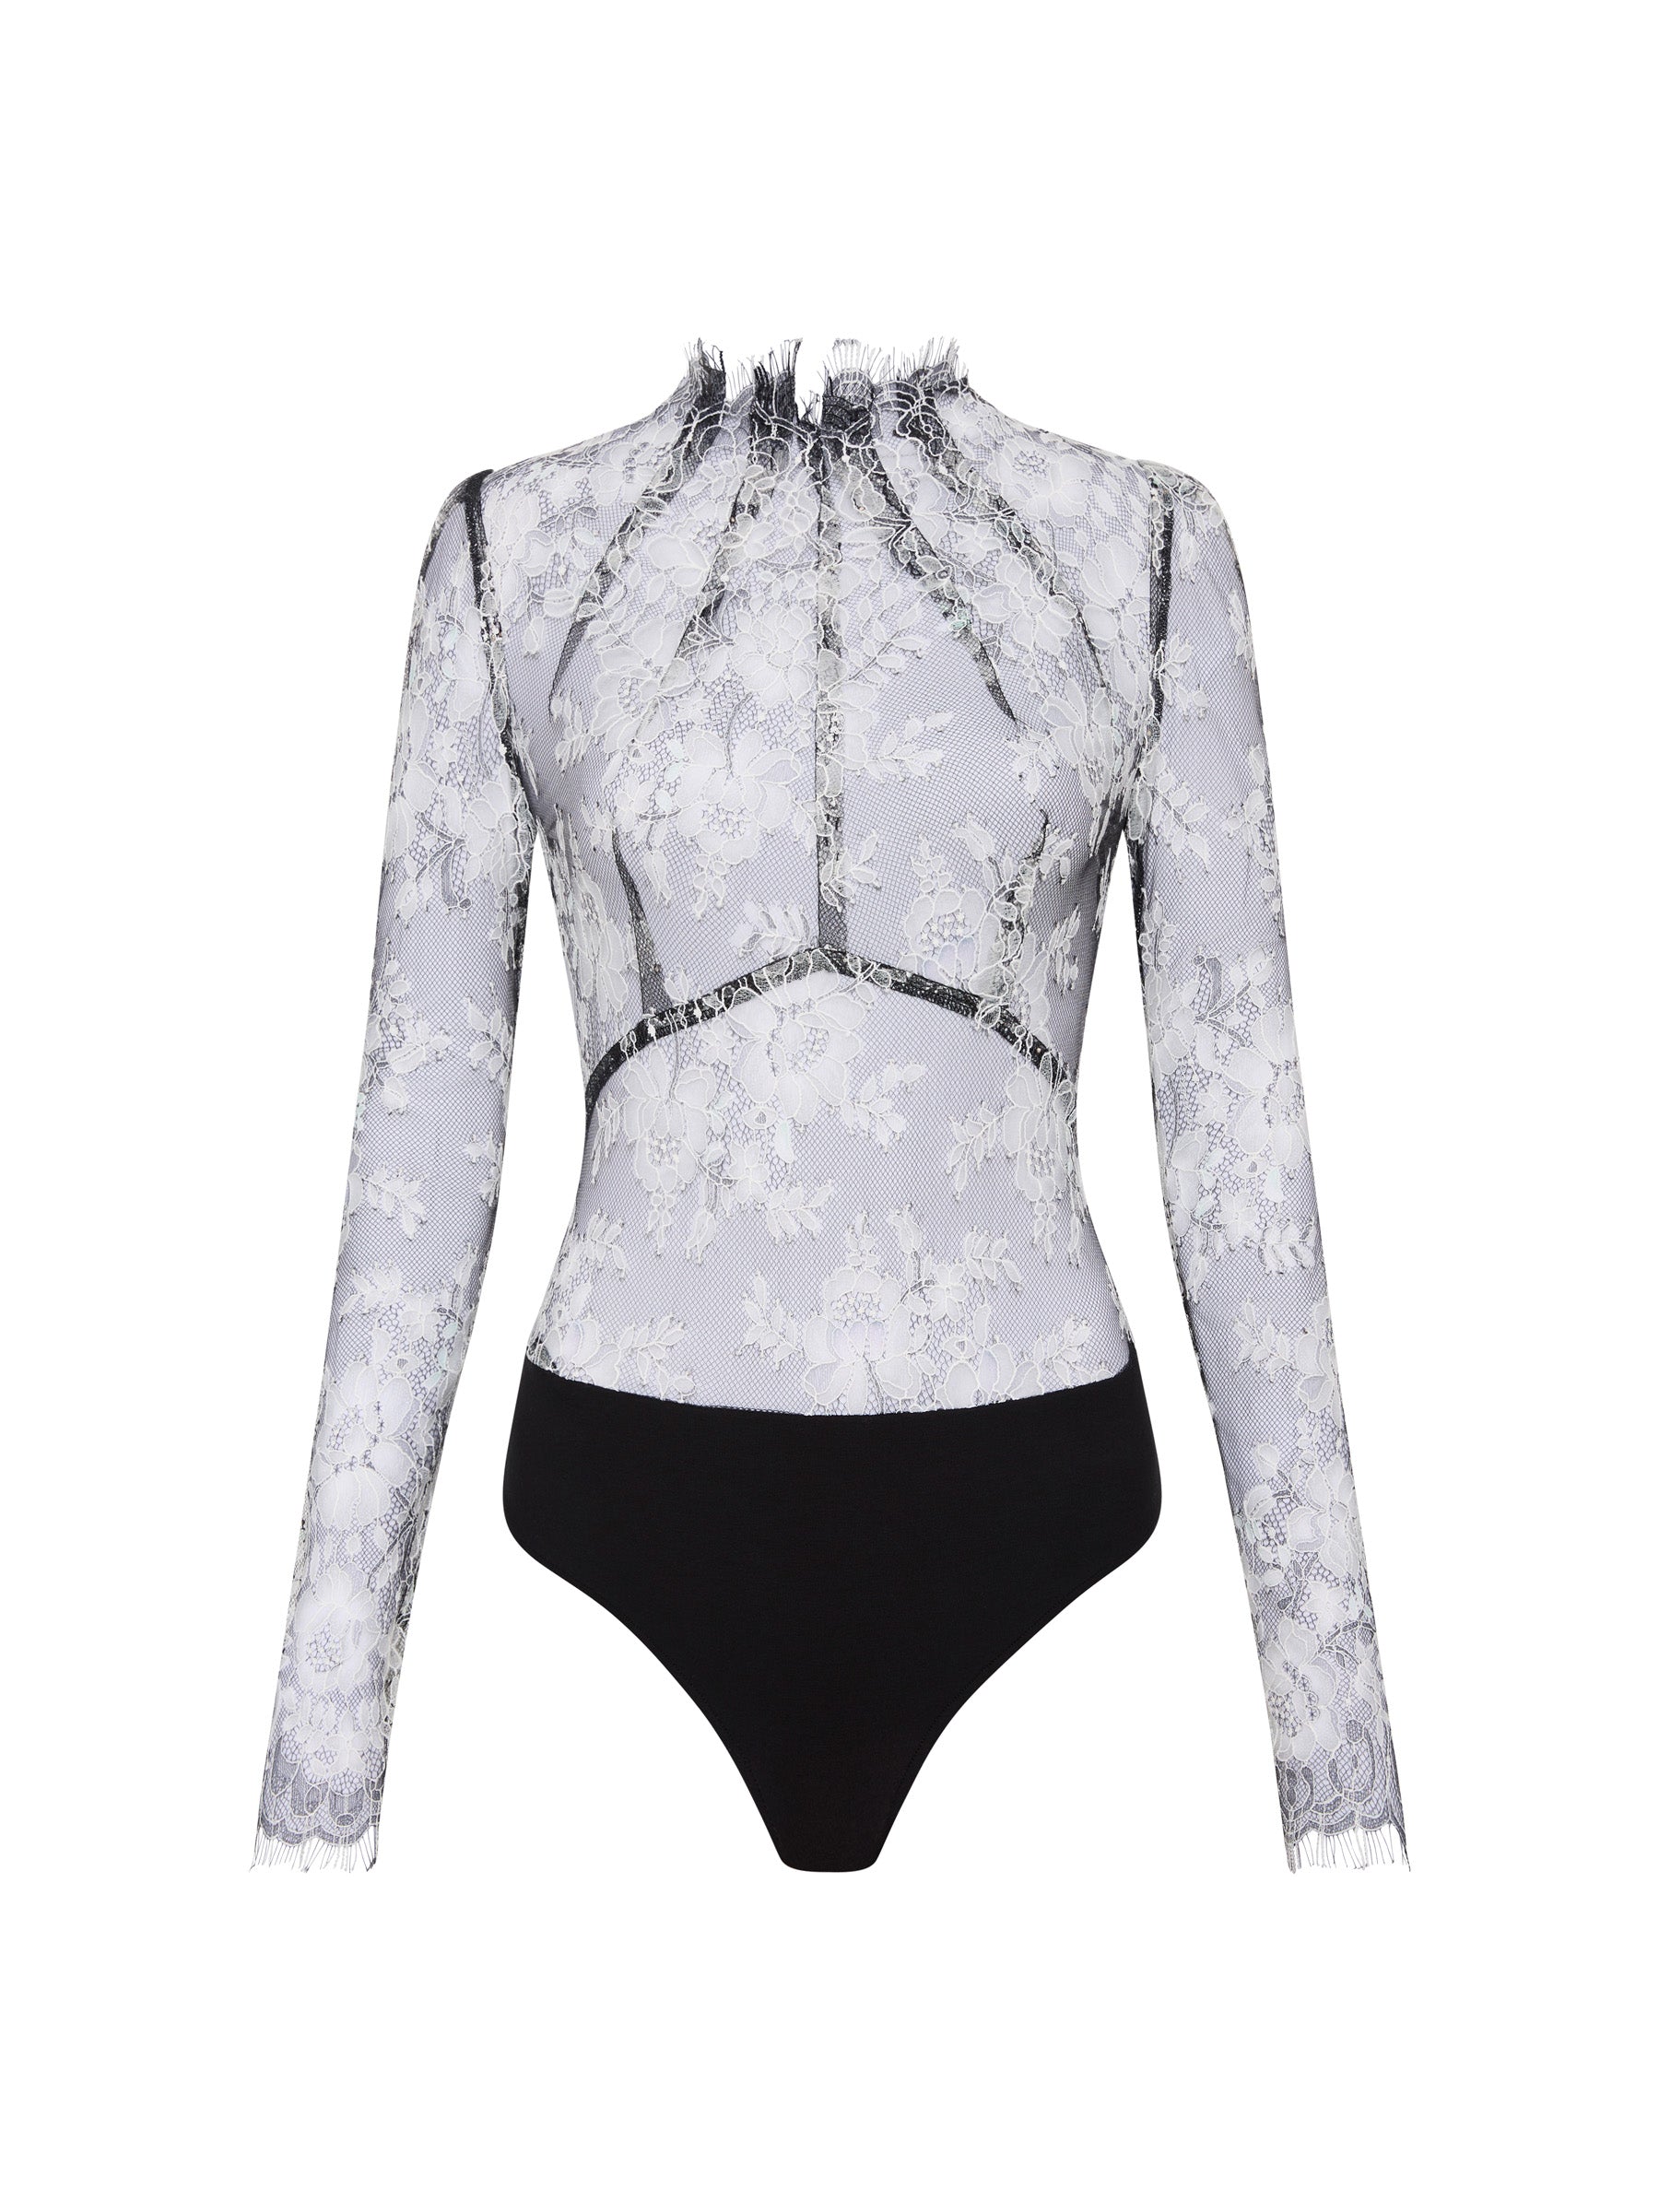 Melody Body Suit (PRE-ORDER Due Wed 3 April)